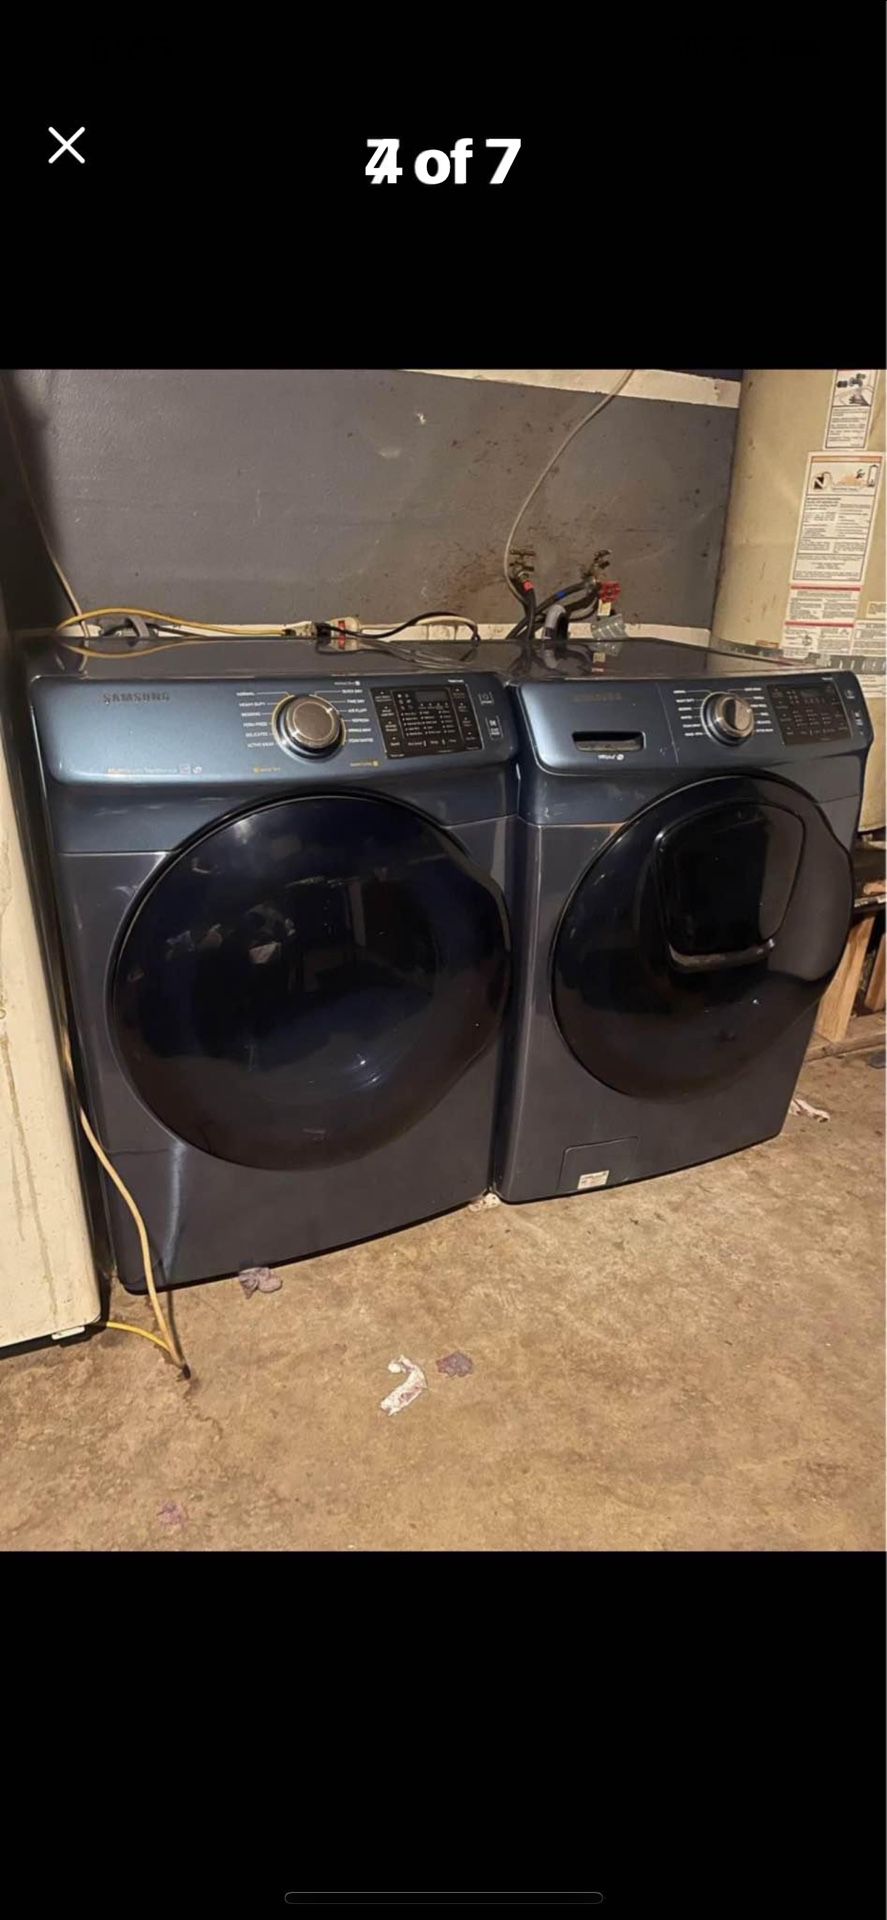 Washer and dryer both electric selling as set $600 